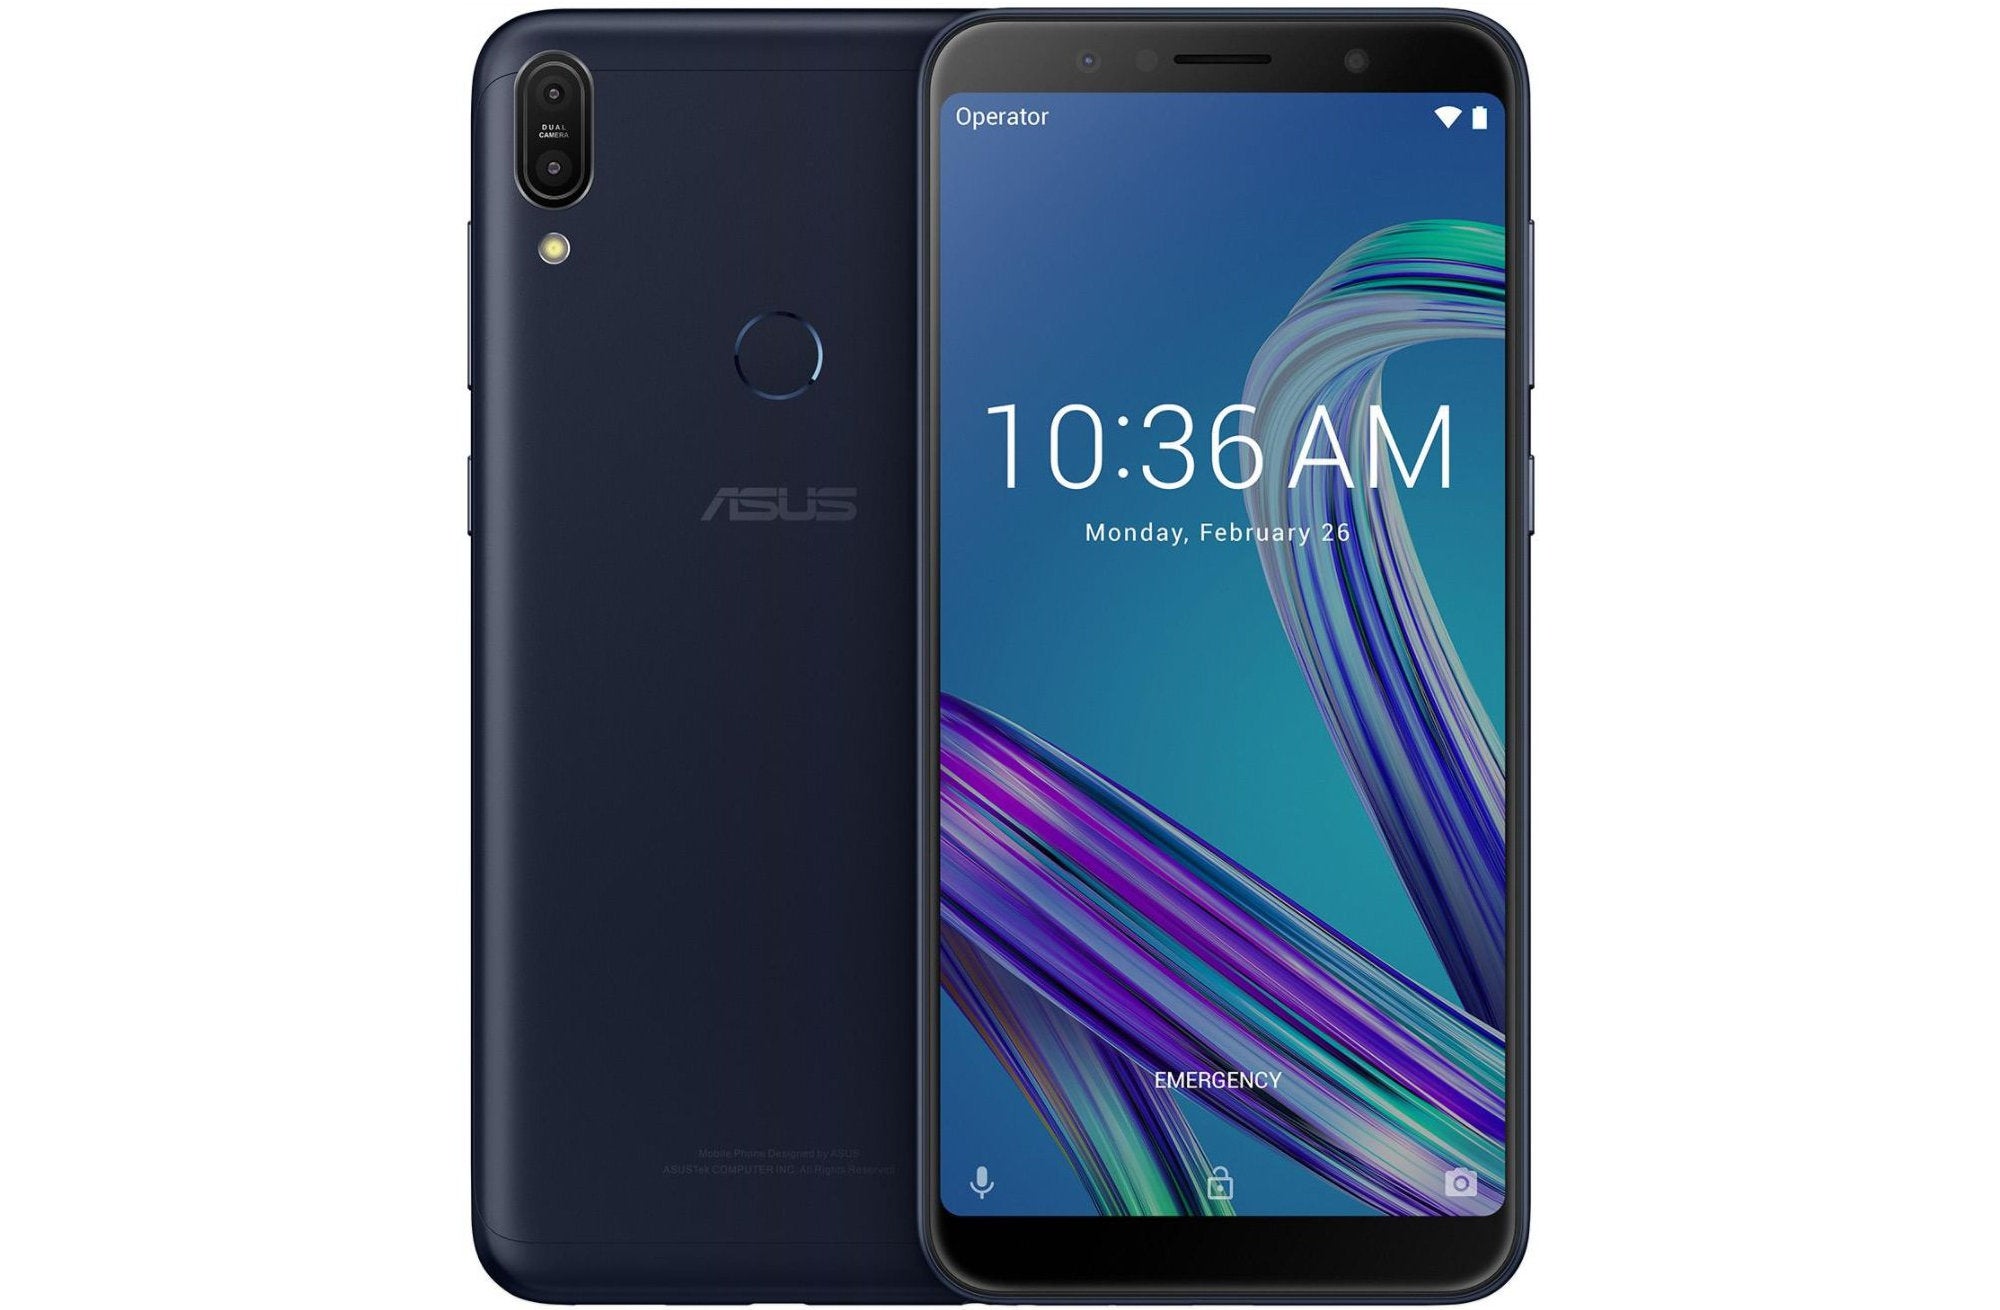 Asus ZenFone Max Pro M1 specs and image leaked ahead of official announcement